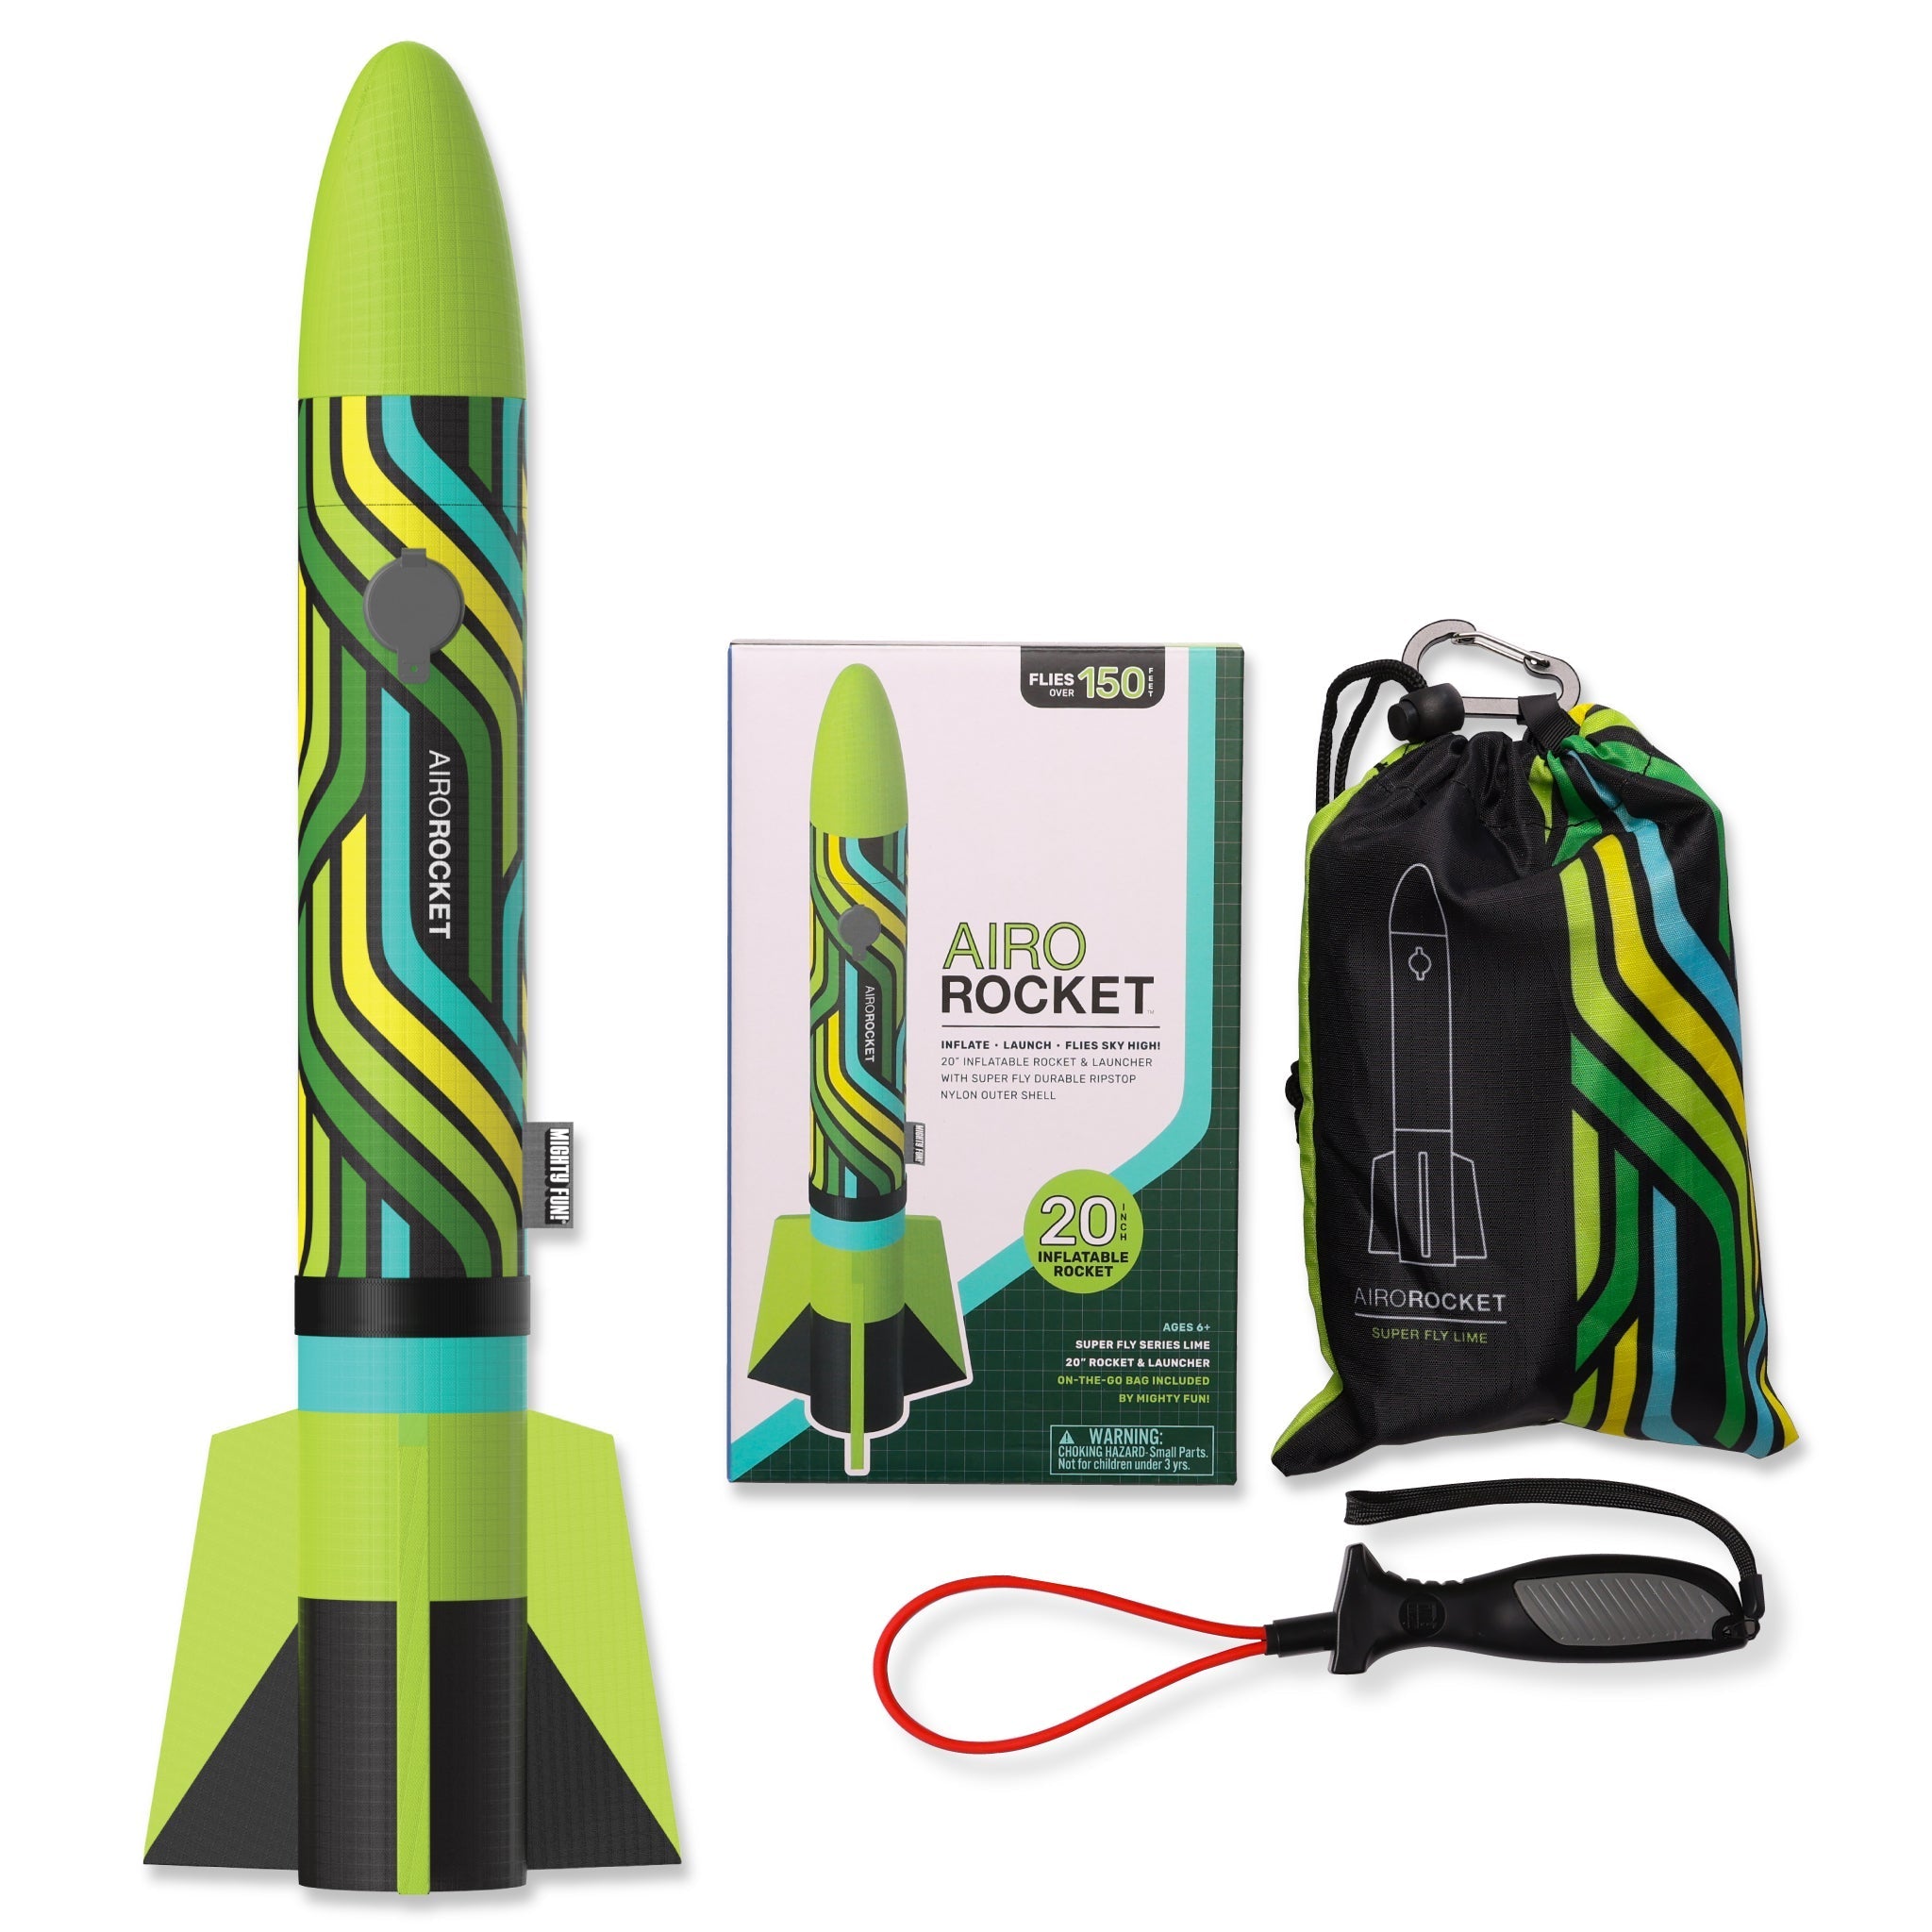 Lime Airo Rocket toy rocket with hand launcher, storage bag, and color box by Mighty Fun!